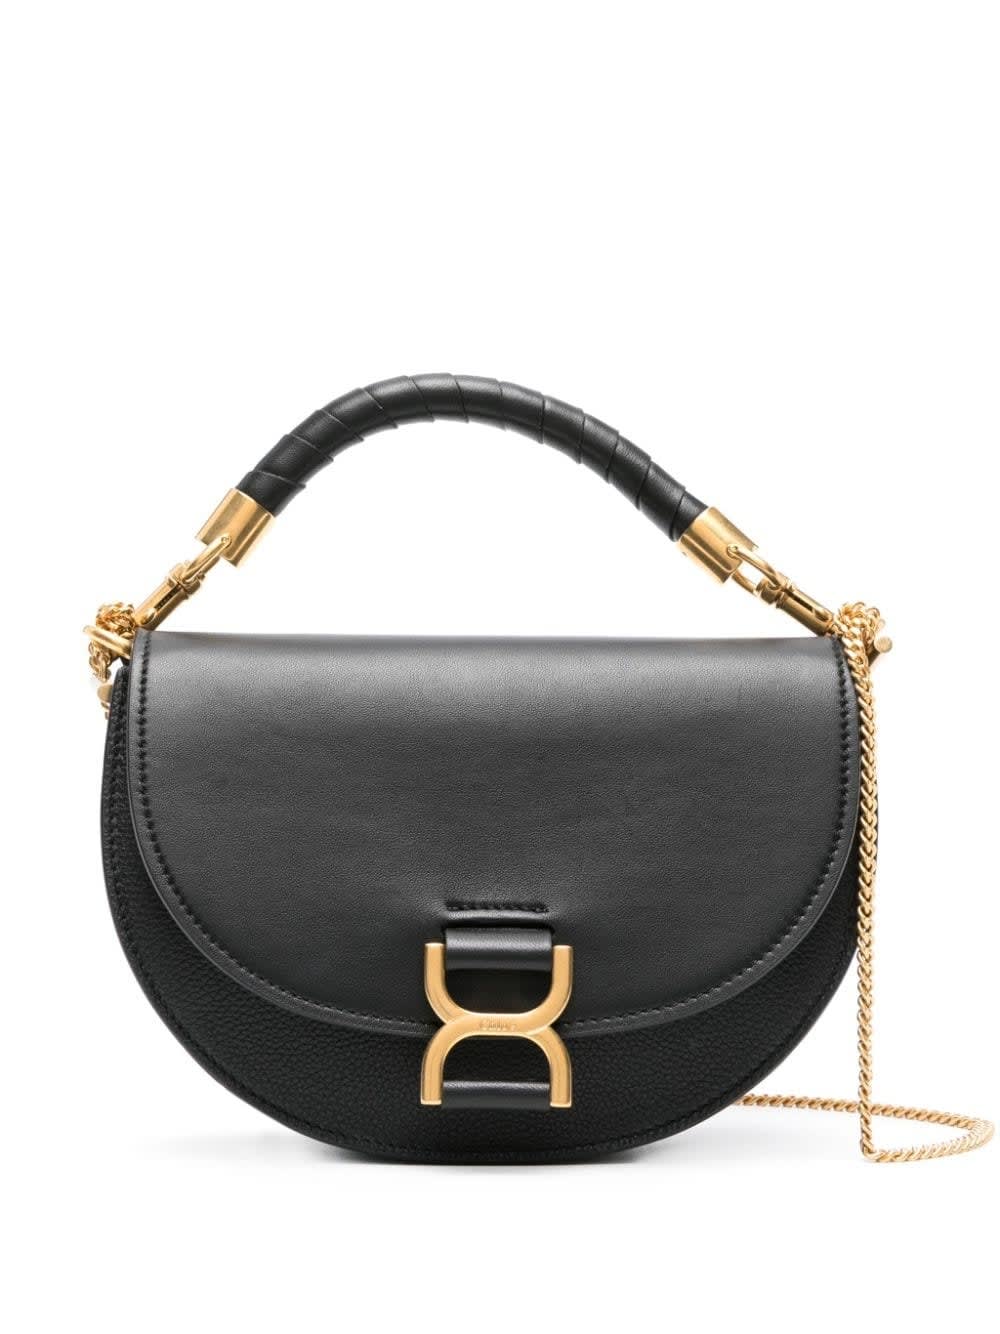 CHLOÉ BLACK MARCIE BAG WITH FLAP AND CHAIN